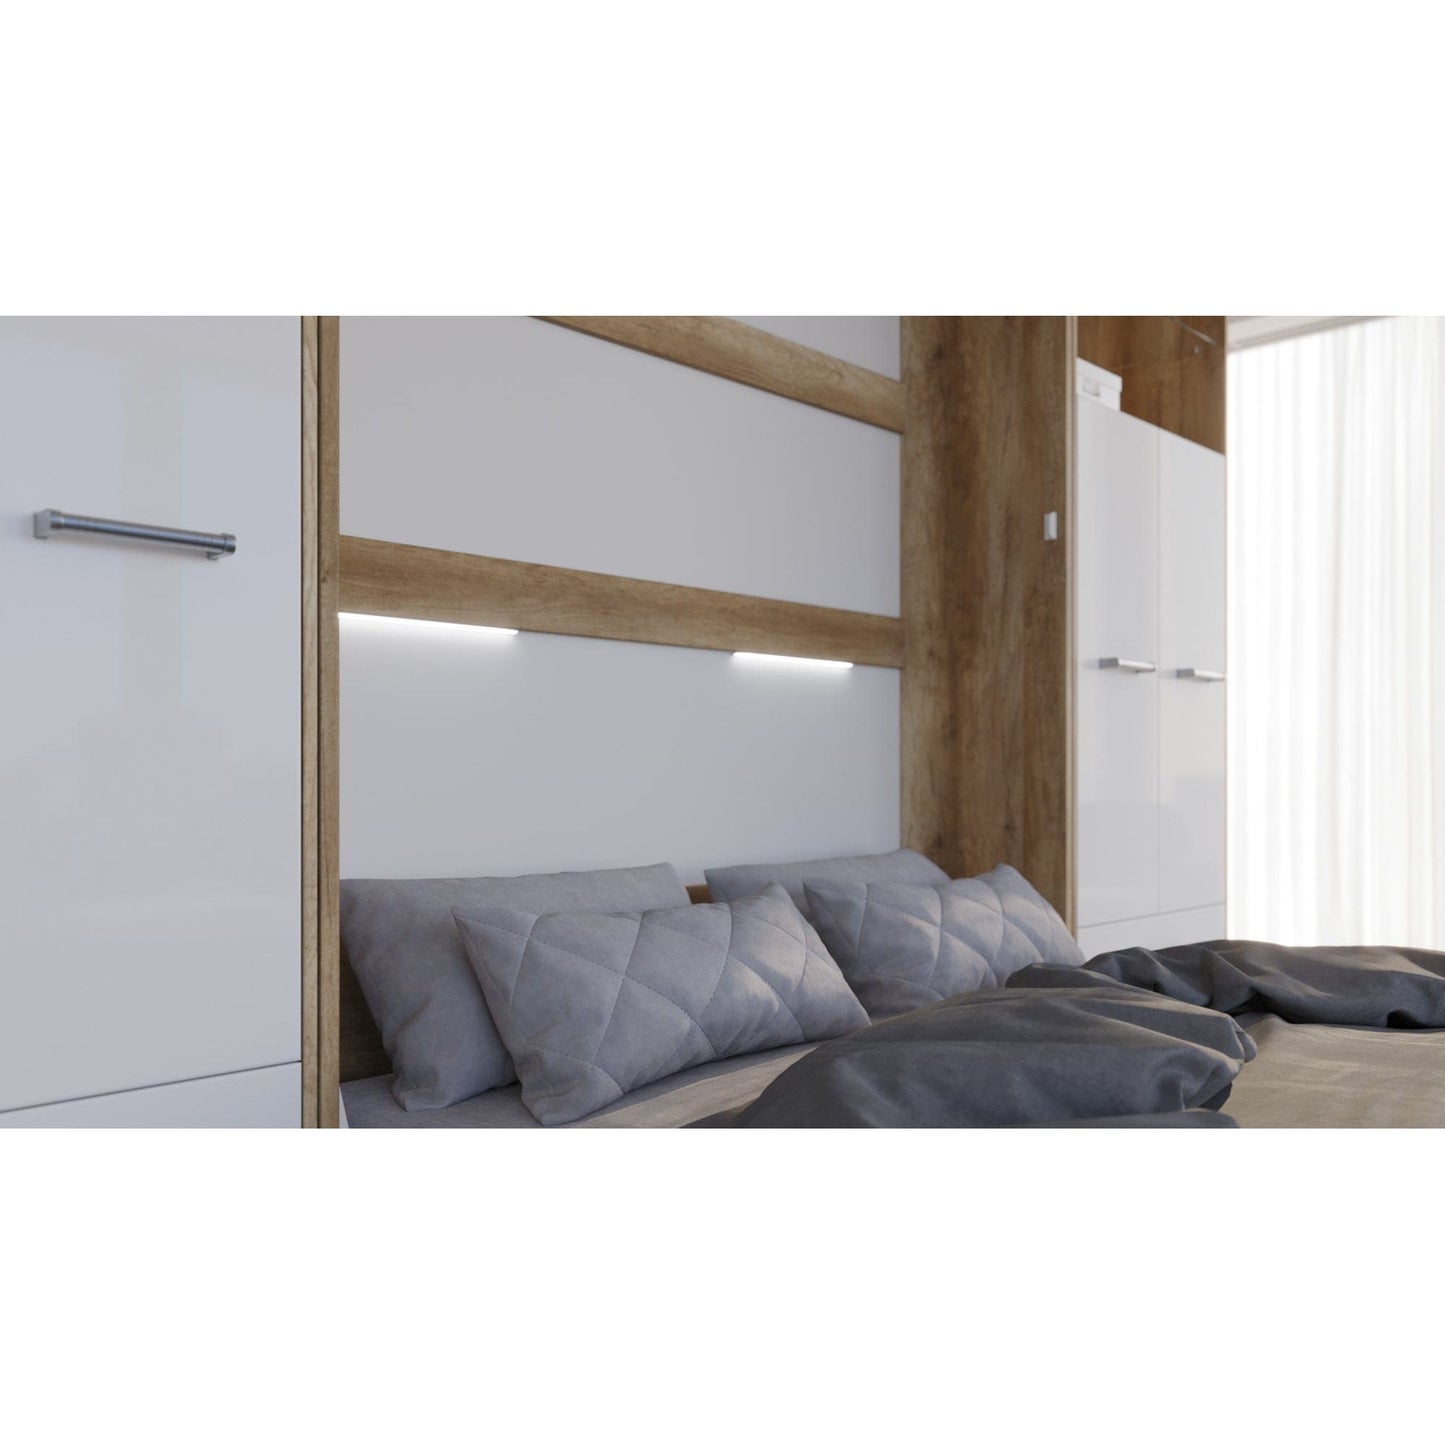 Maxima House Vertical Murphy Bed Invento. European Queen + 2 cabinets